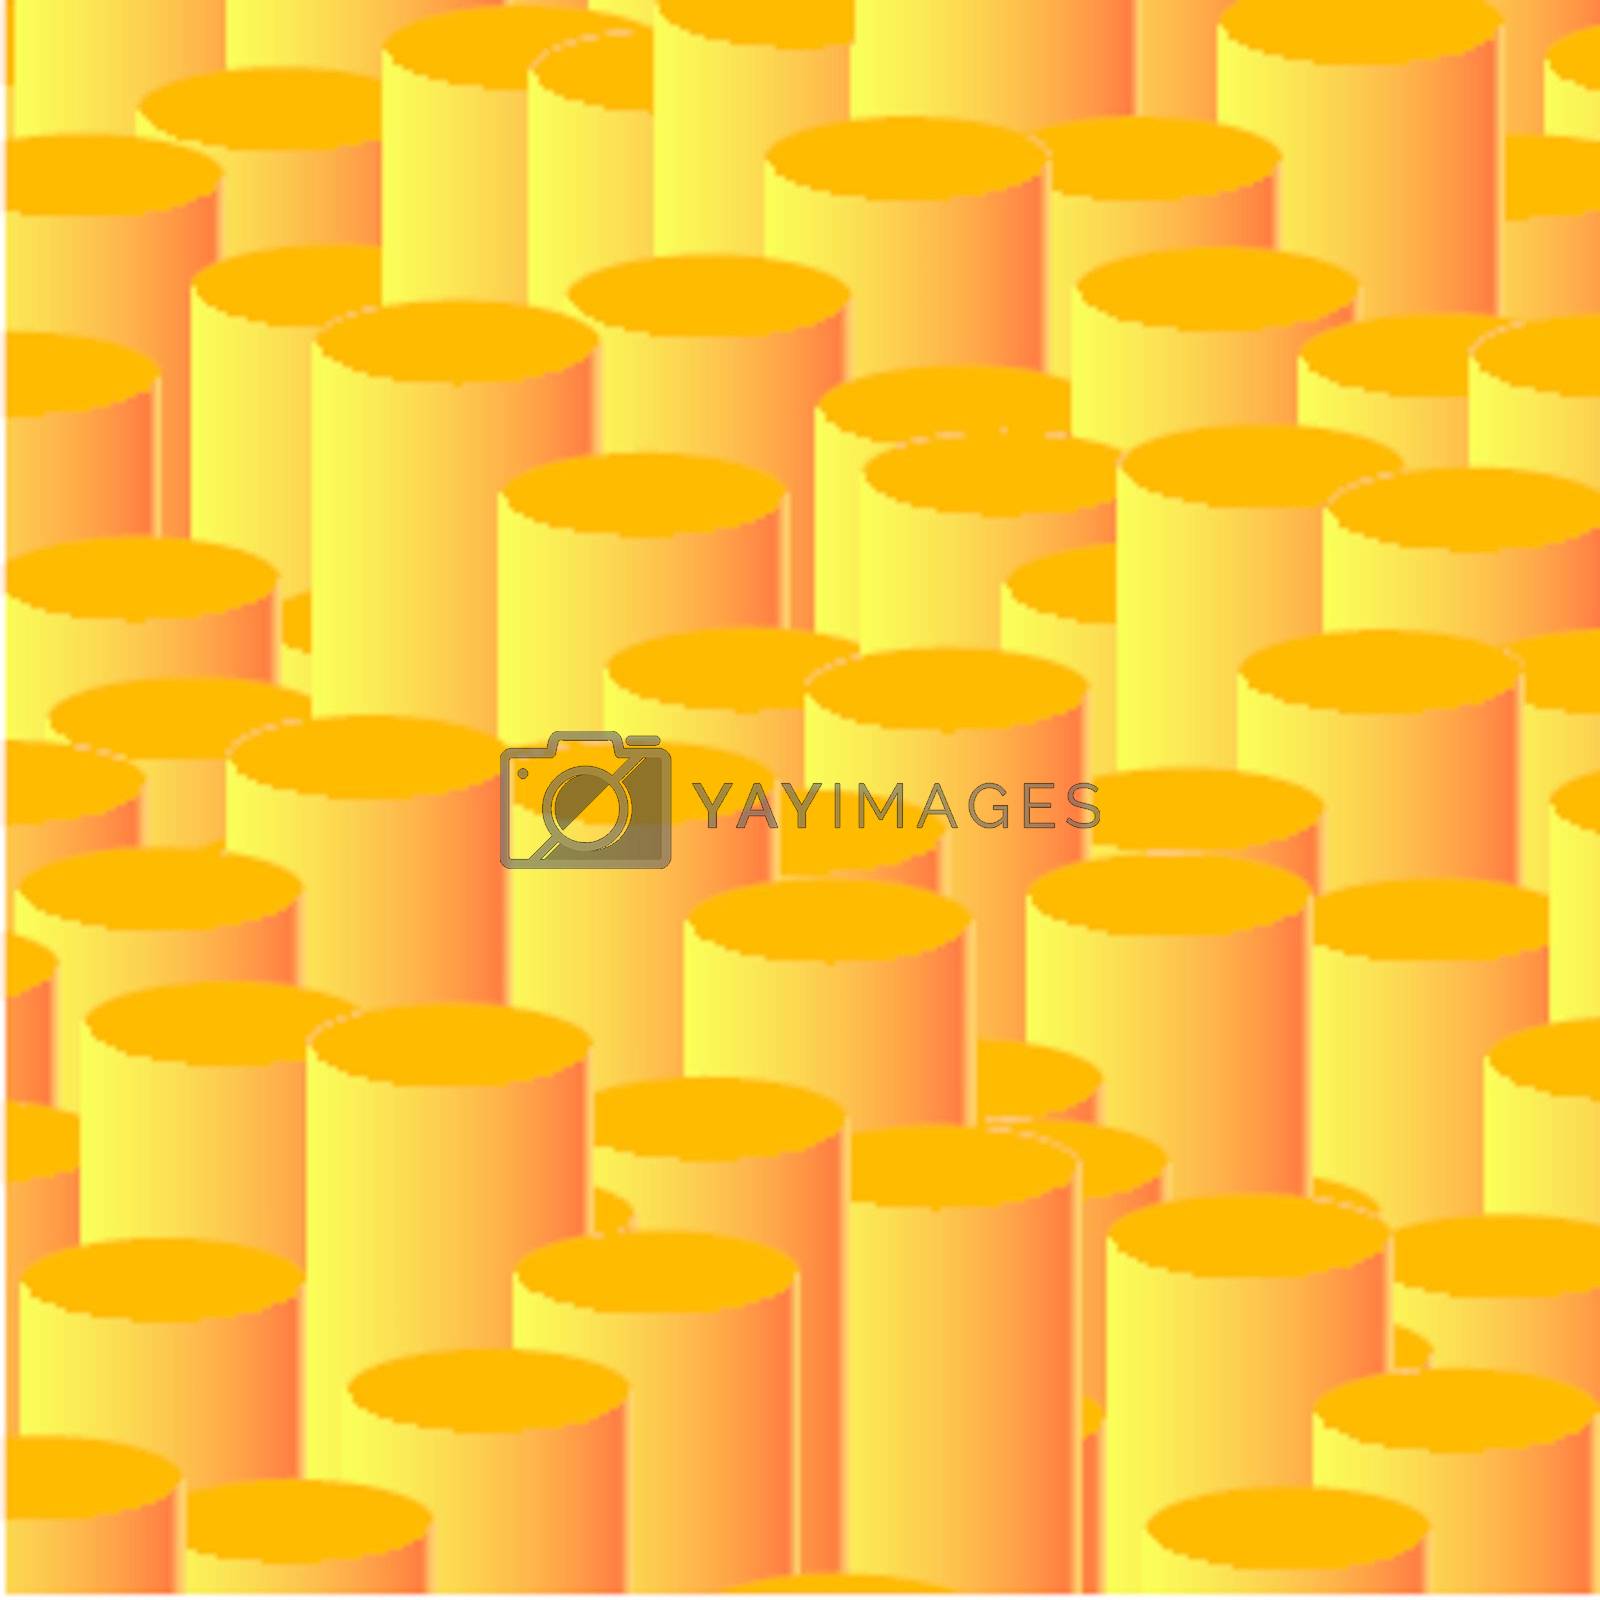 Royalty free image of Column chart - abstract vector background by pzaxe